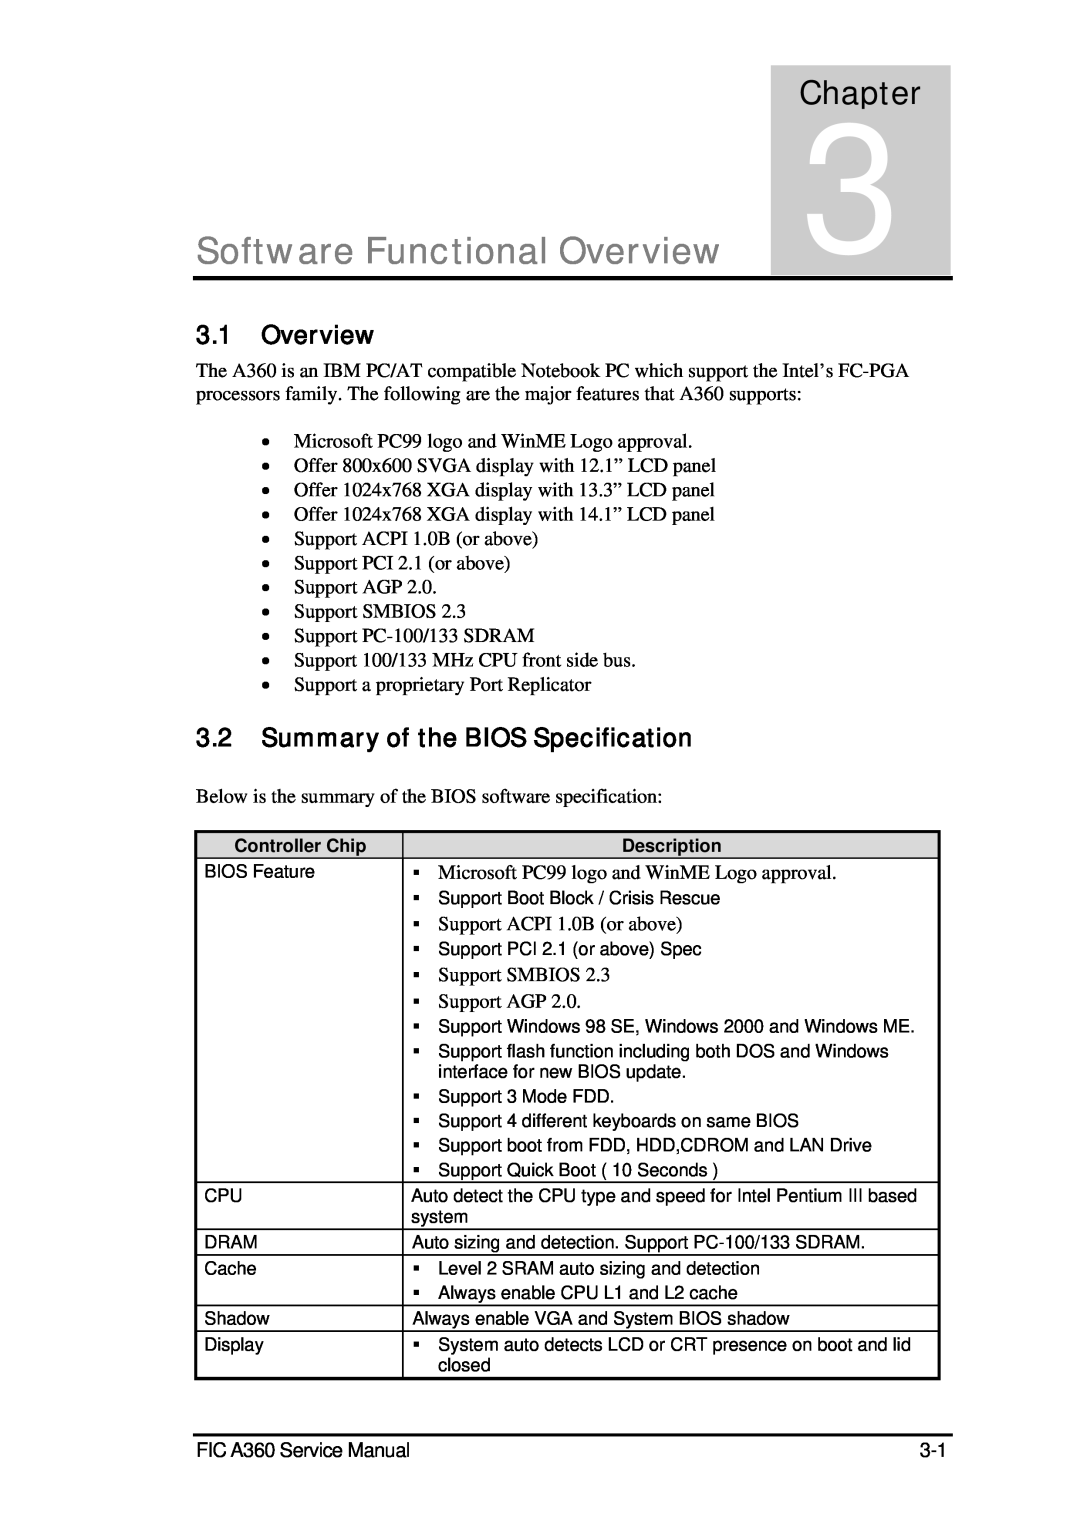 FIC A360 service manual Summary of the BIOS Specification, Software Functional Overview, Chapter 